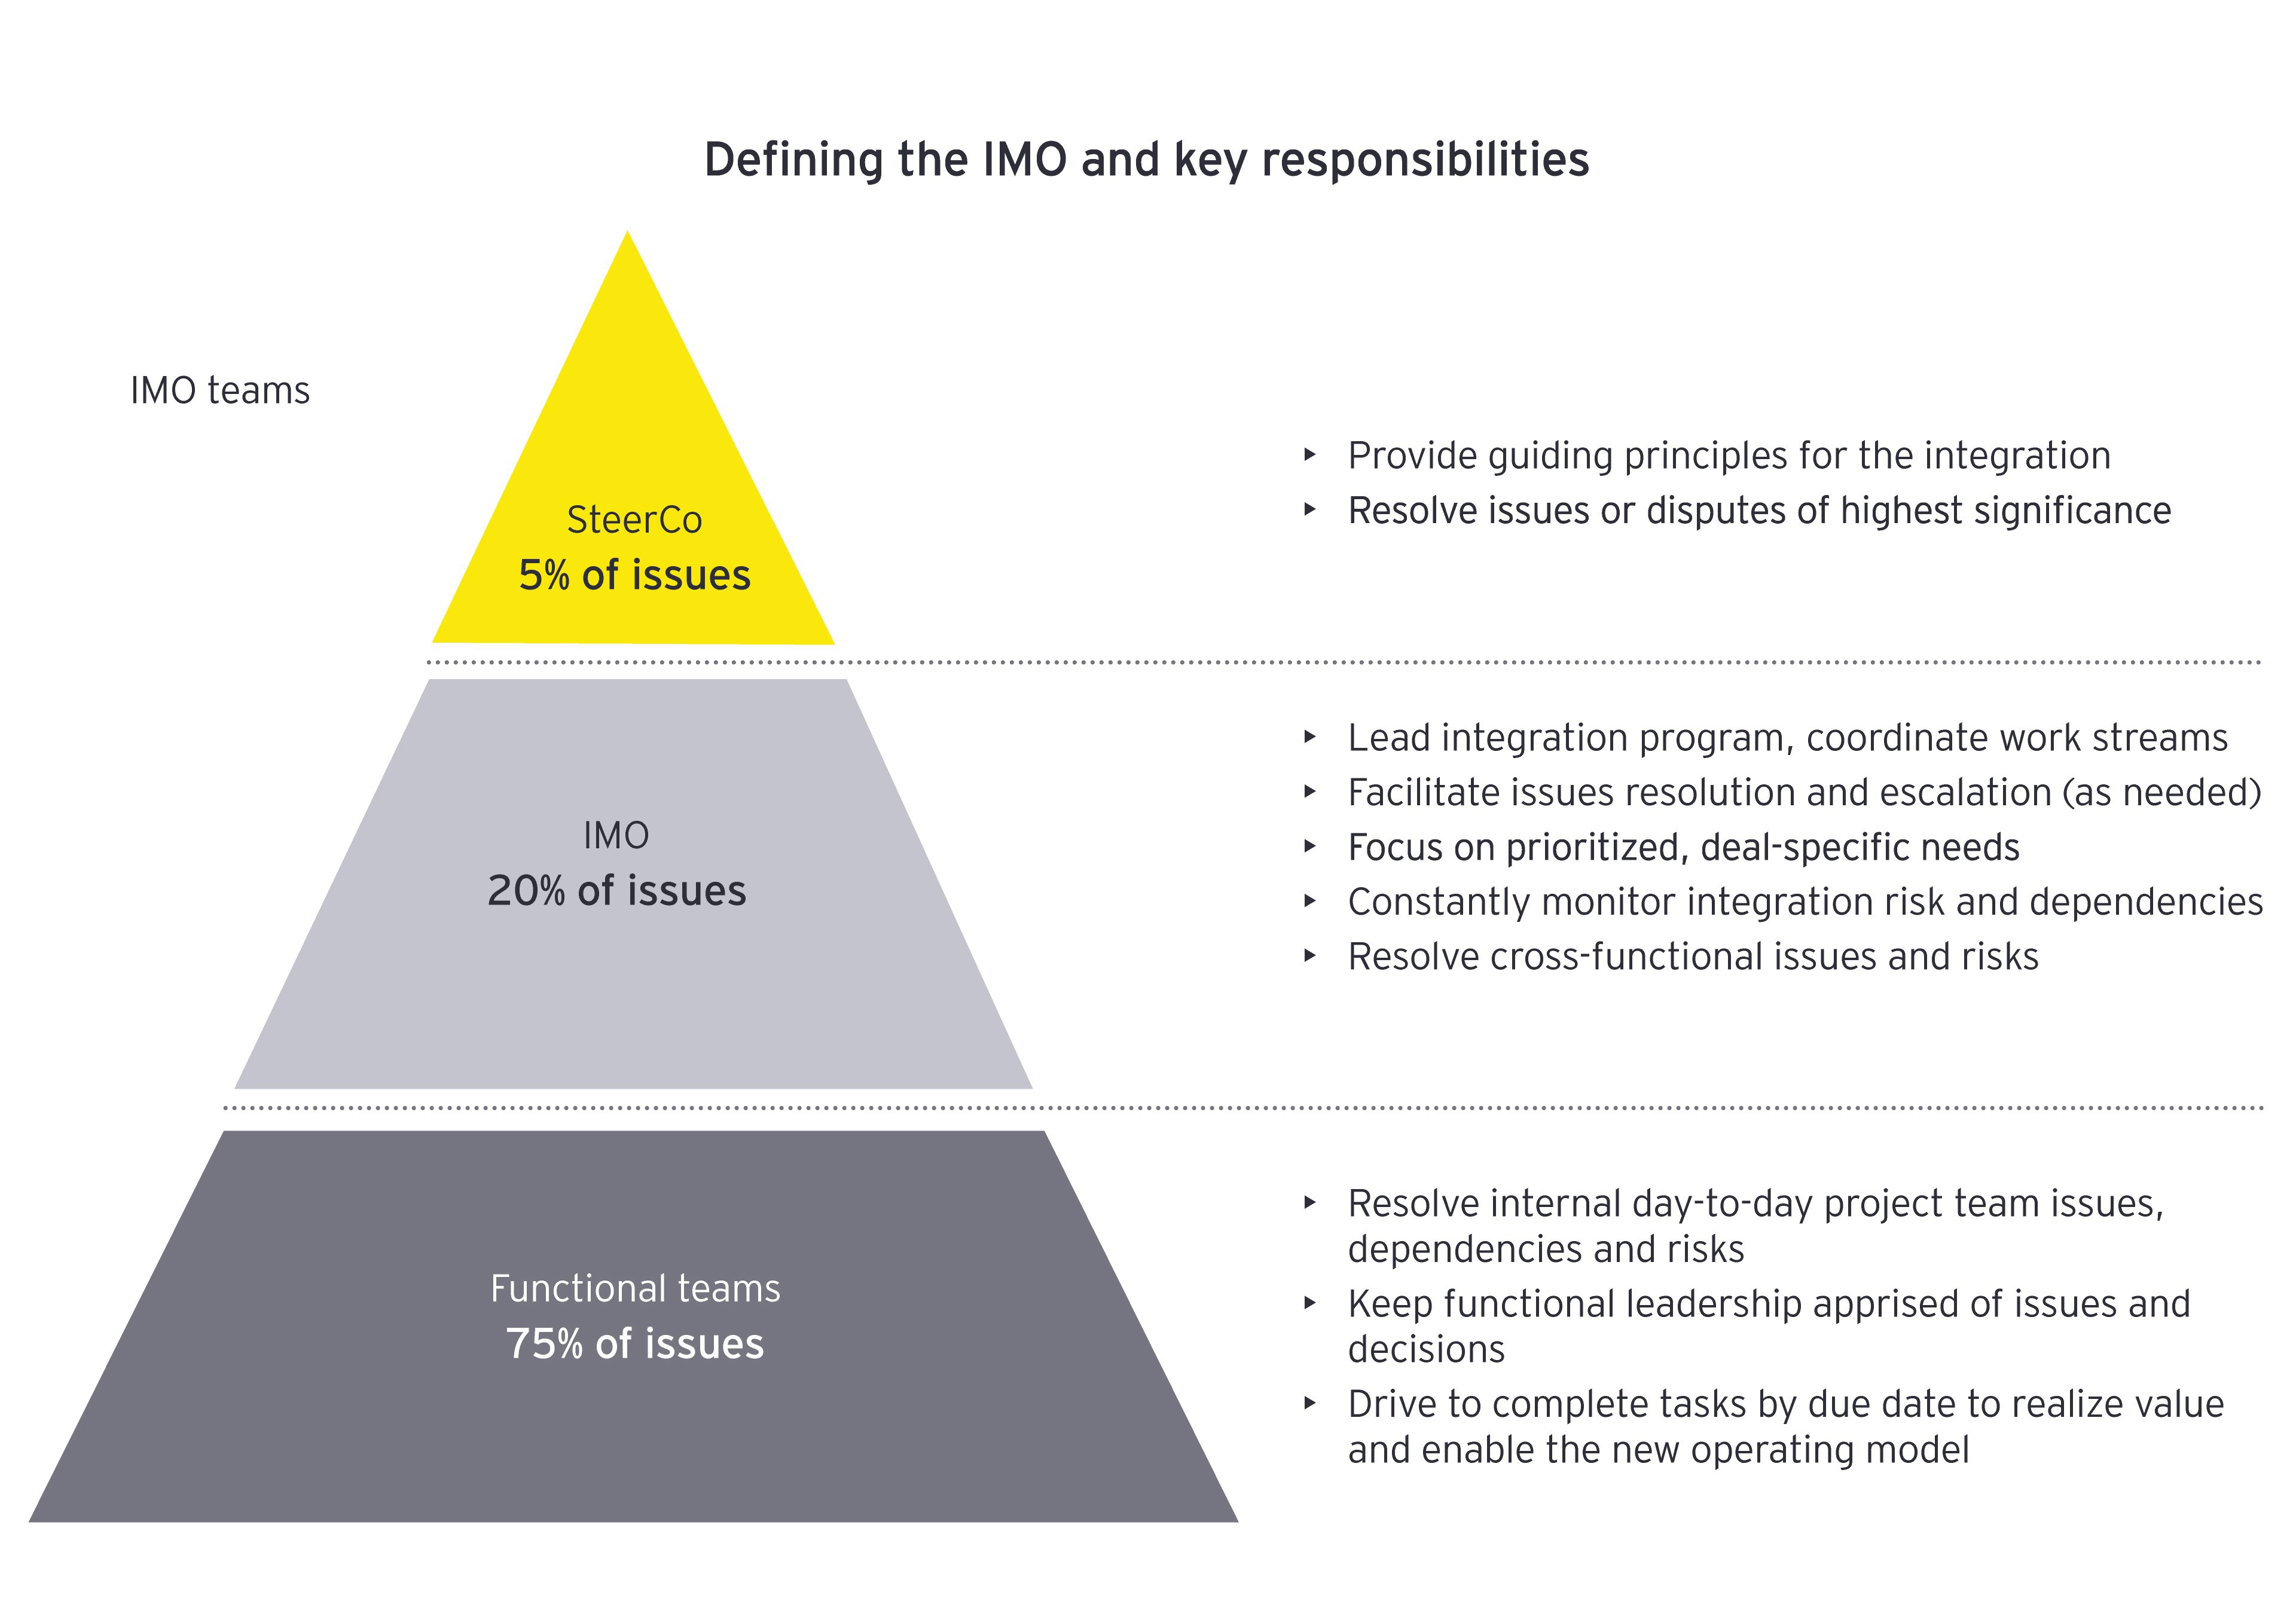 EY mergers & acquisitions integration defining IMO and key responsibilities